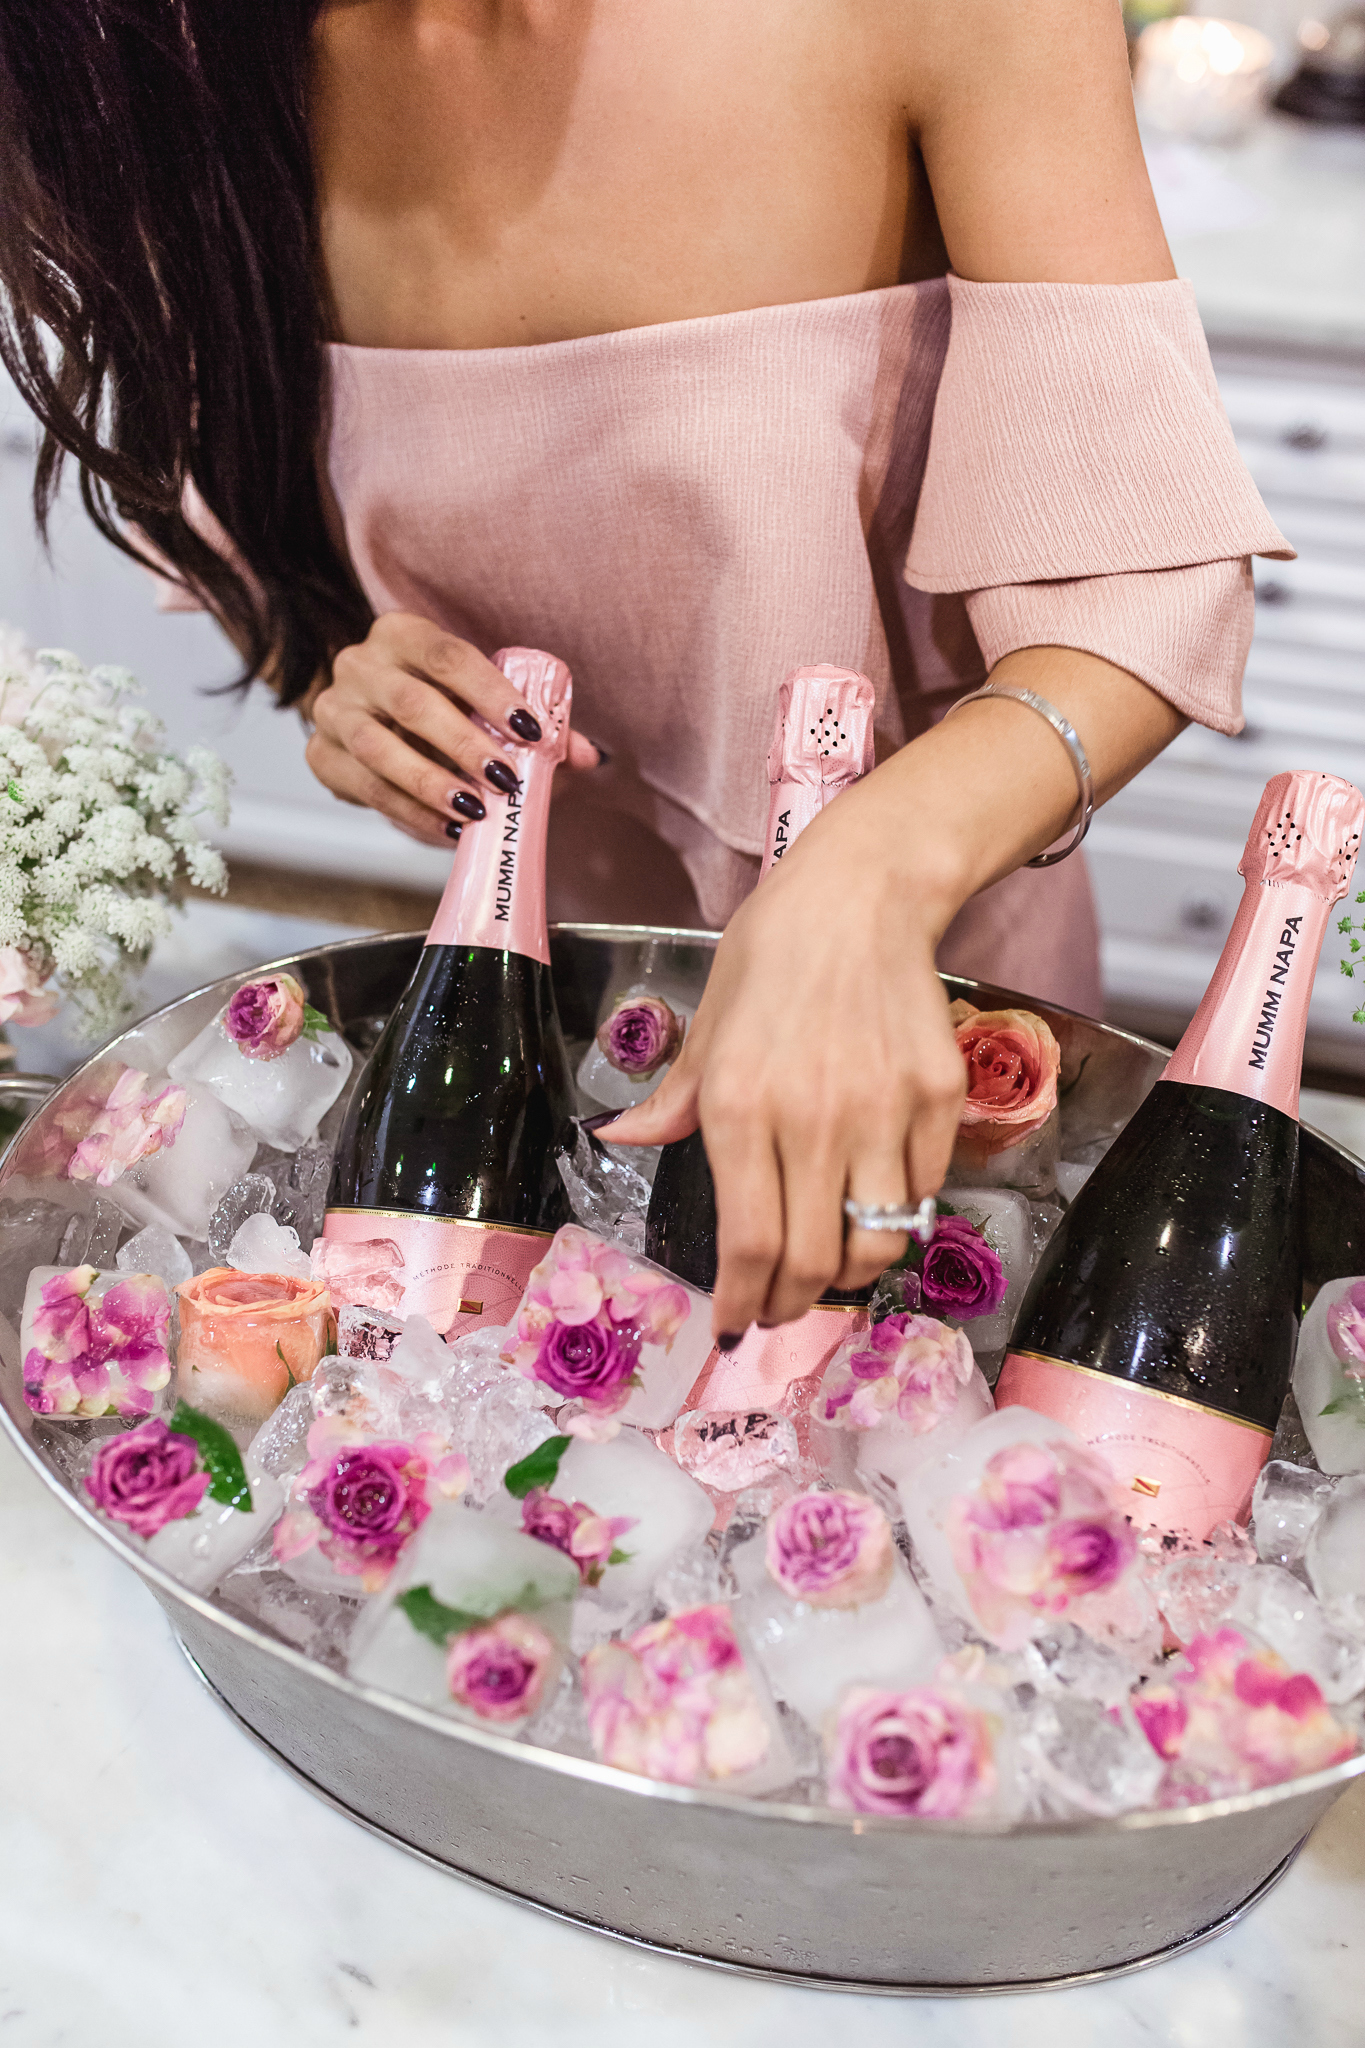 DIY floral ice cubes for a wow effect on your bridal shower decor. // Pin it: How to Slay a Bridal Shower with 10 Epic DIY Ideas // http://mysweetengagement.com